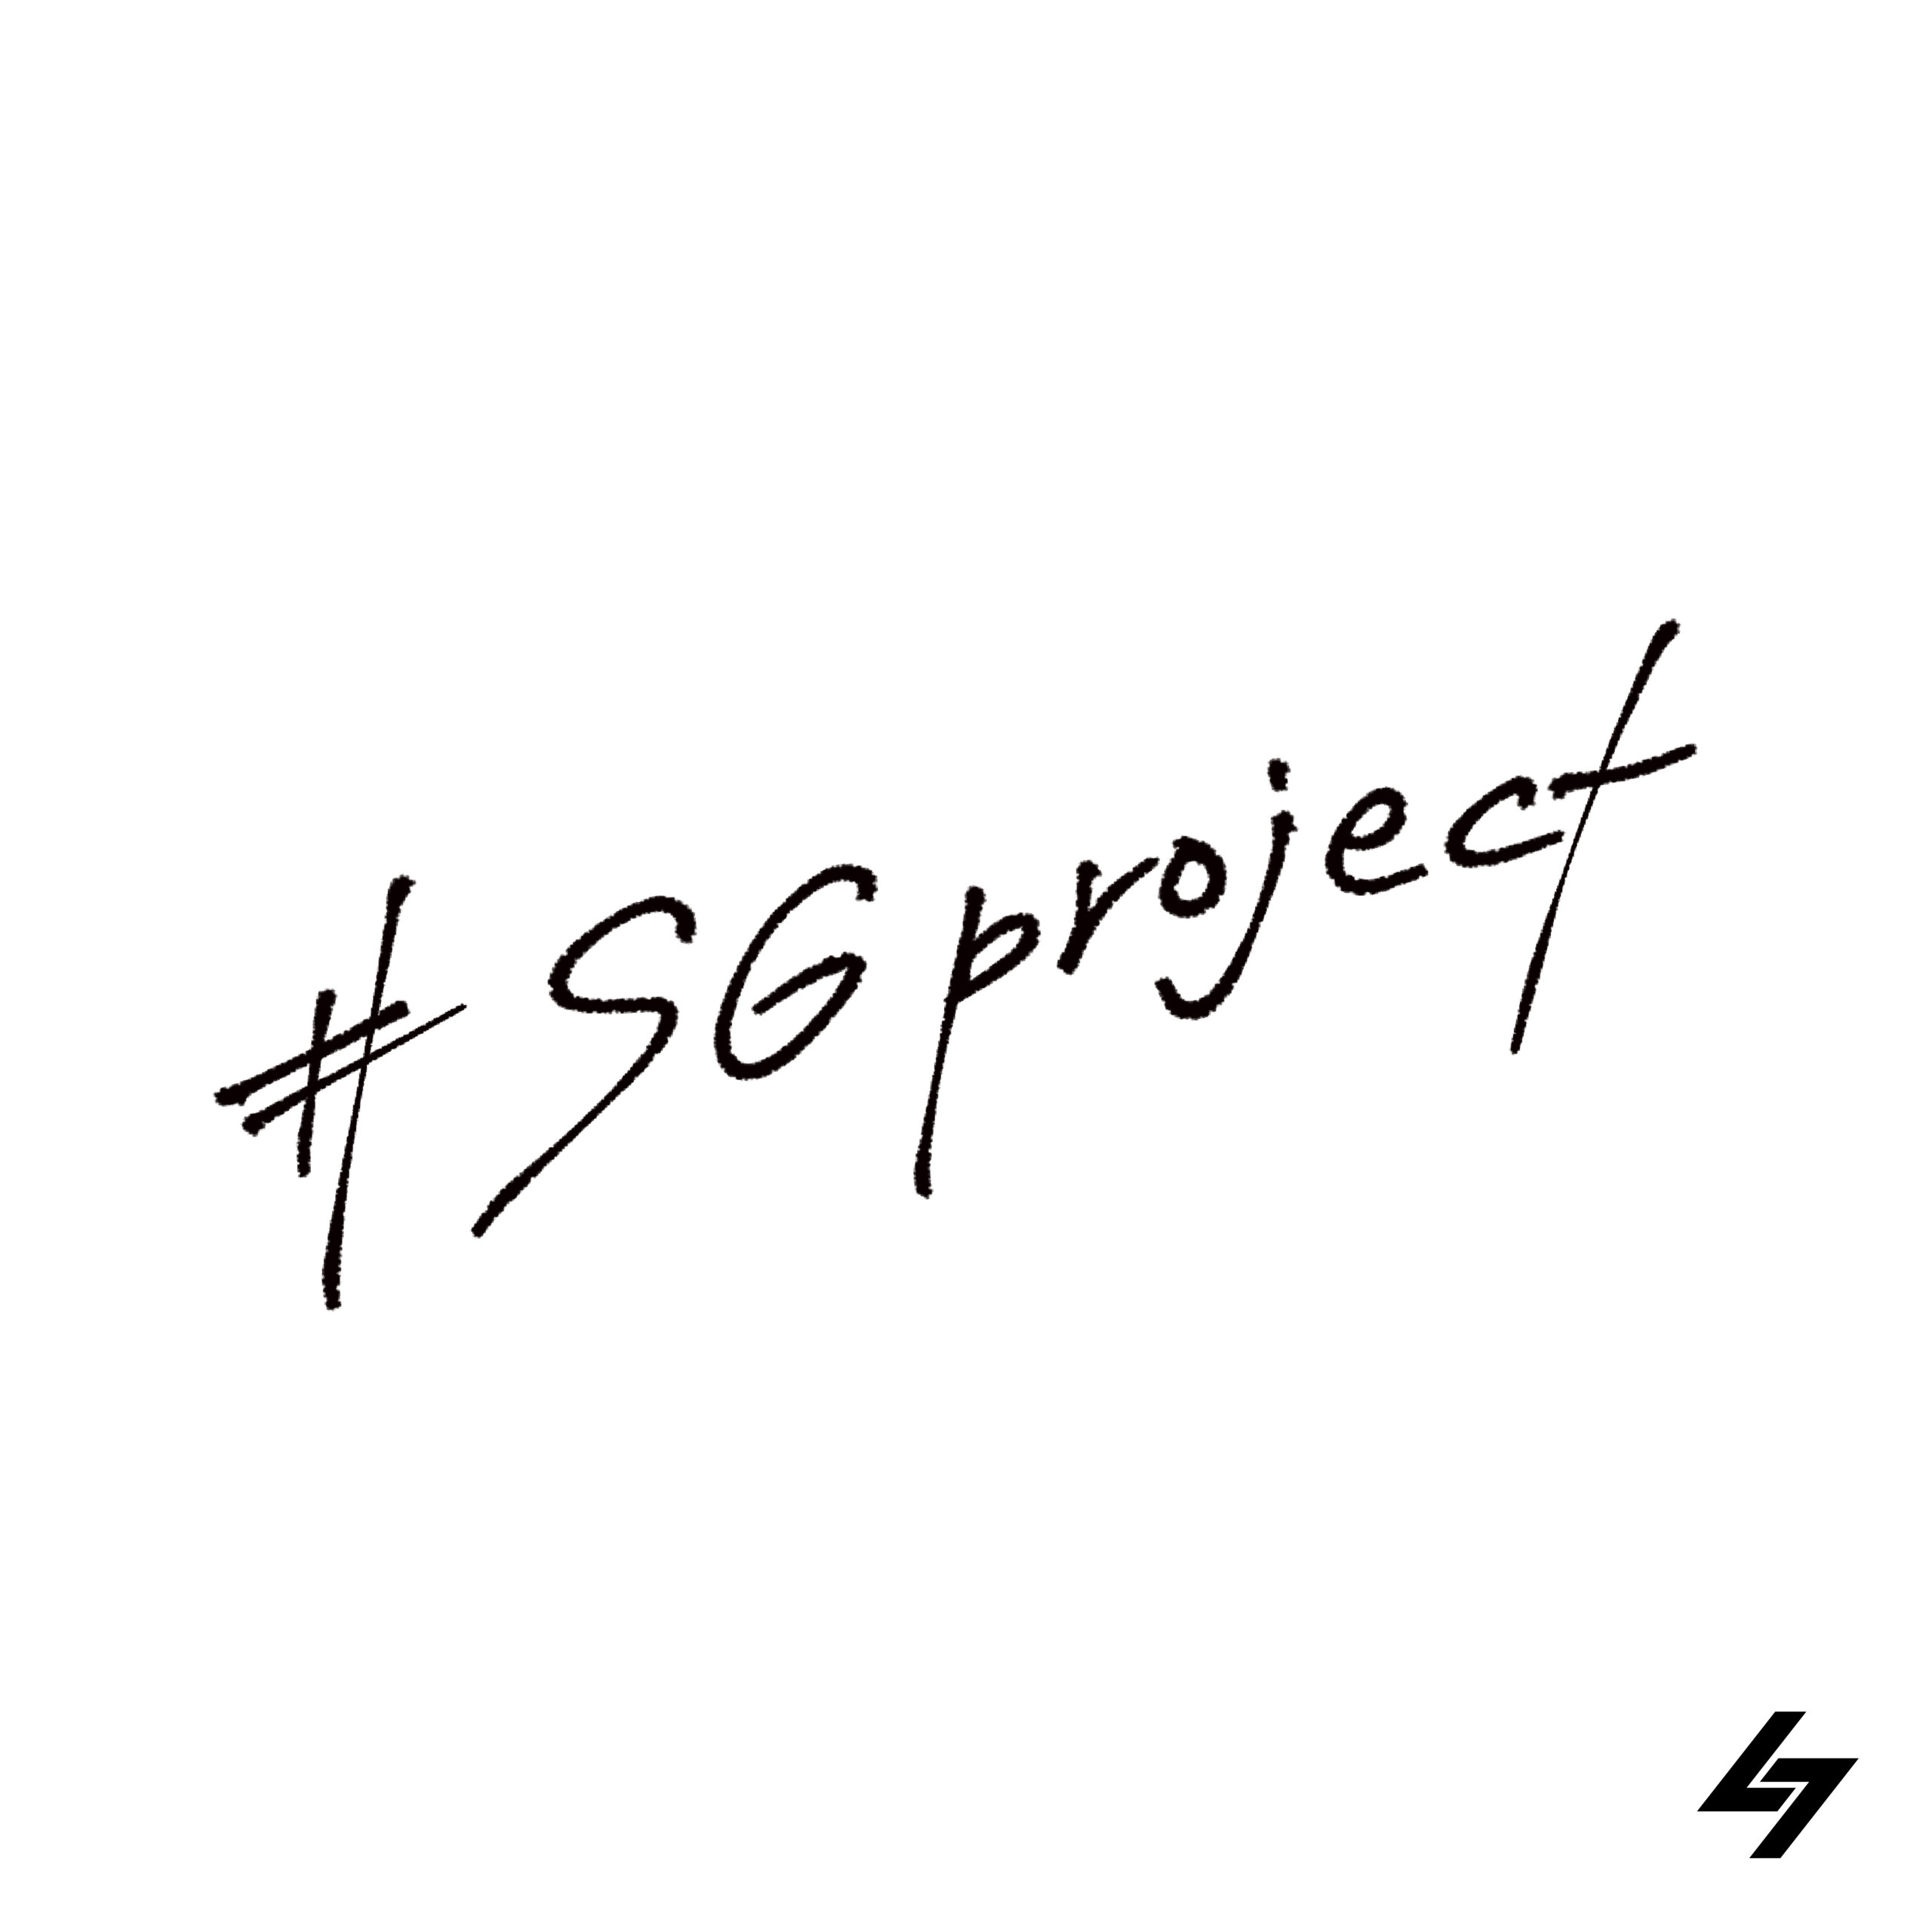  From June 2022, a project entitled “#SGproject” will be launched to distribute featured songs with gorgeous artists as guests every month.